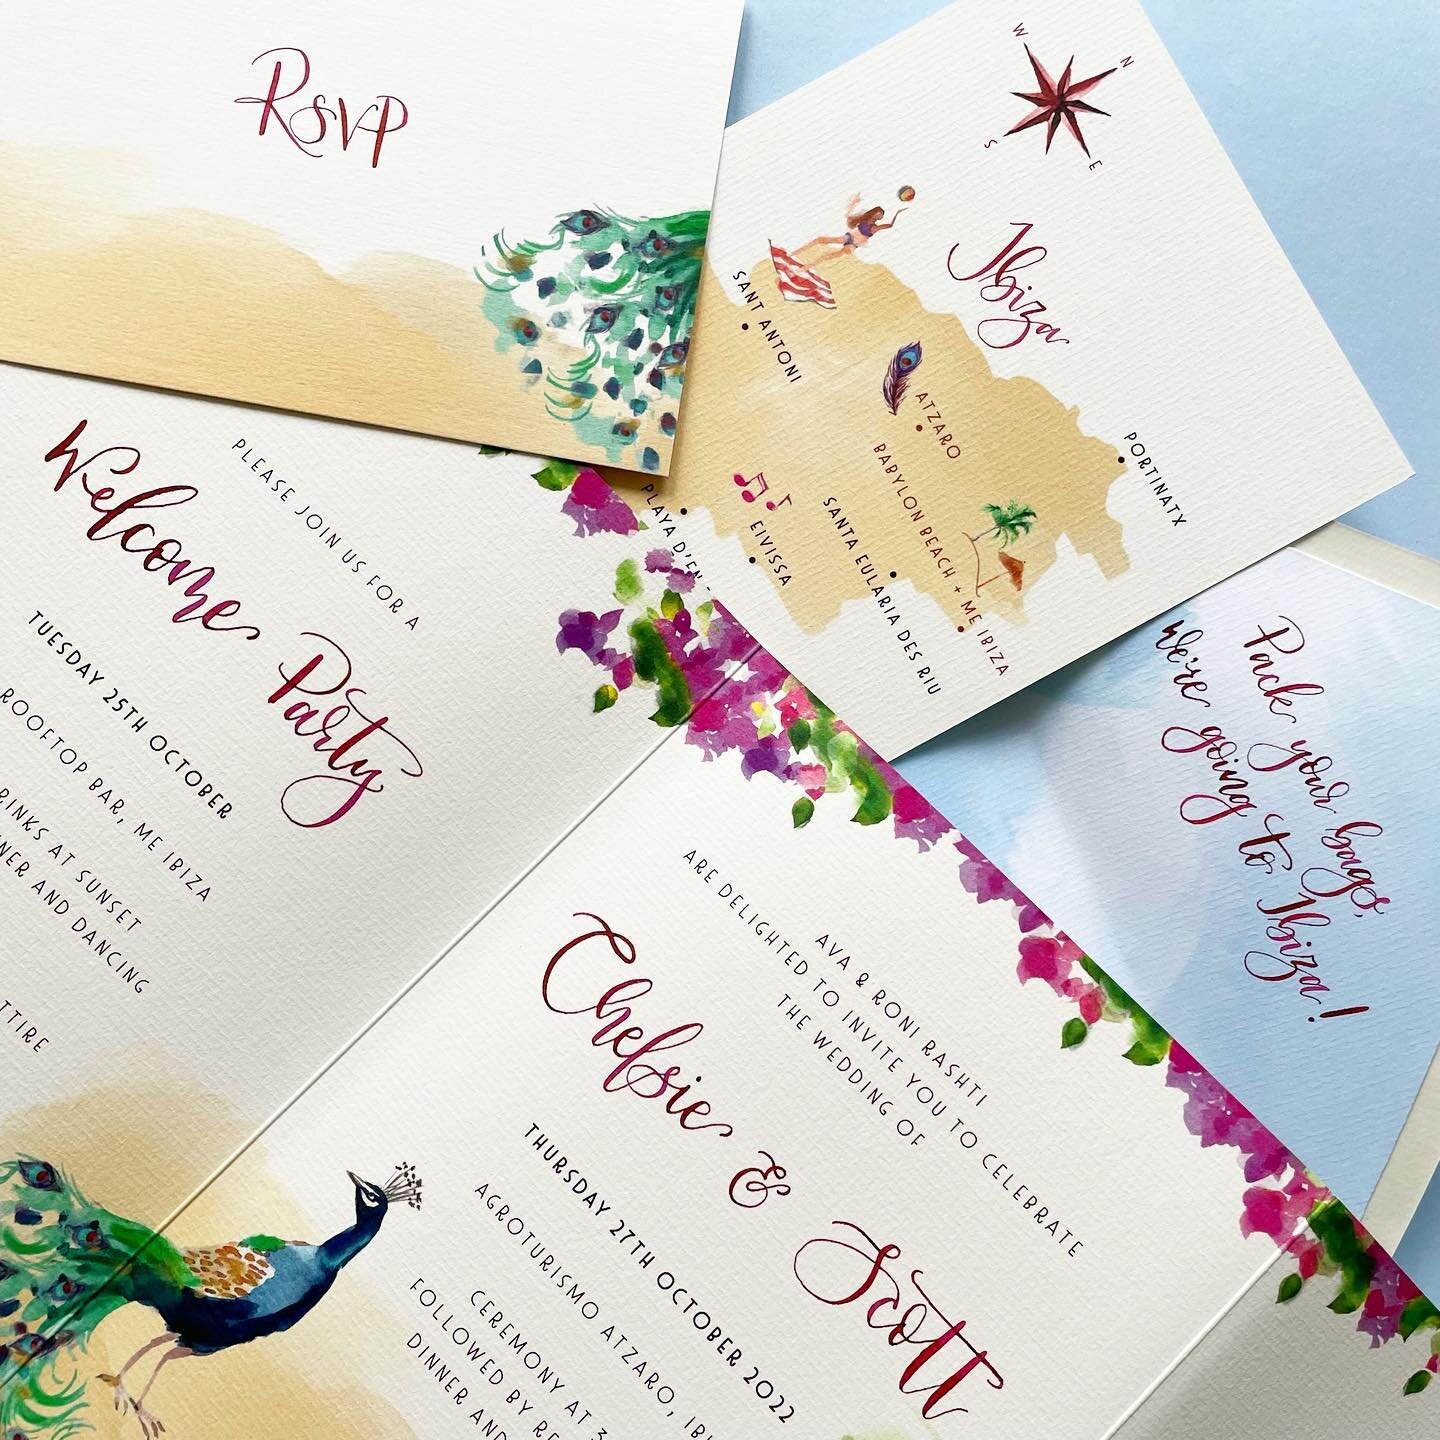 Your invitation ain&rsquo;t just an invitation, it&rsquo;s the hand drawn touches, the rsvps, extra cards, envelope liners, wax seals and all. It&rsquo;s what we call your invitation suite❣️
.
.
.
@atzaro_hotel #invitationsuite #handdrawninvitations 